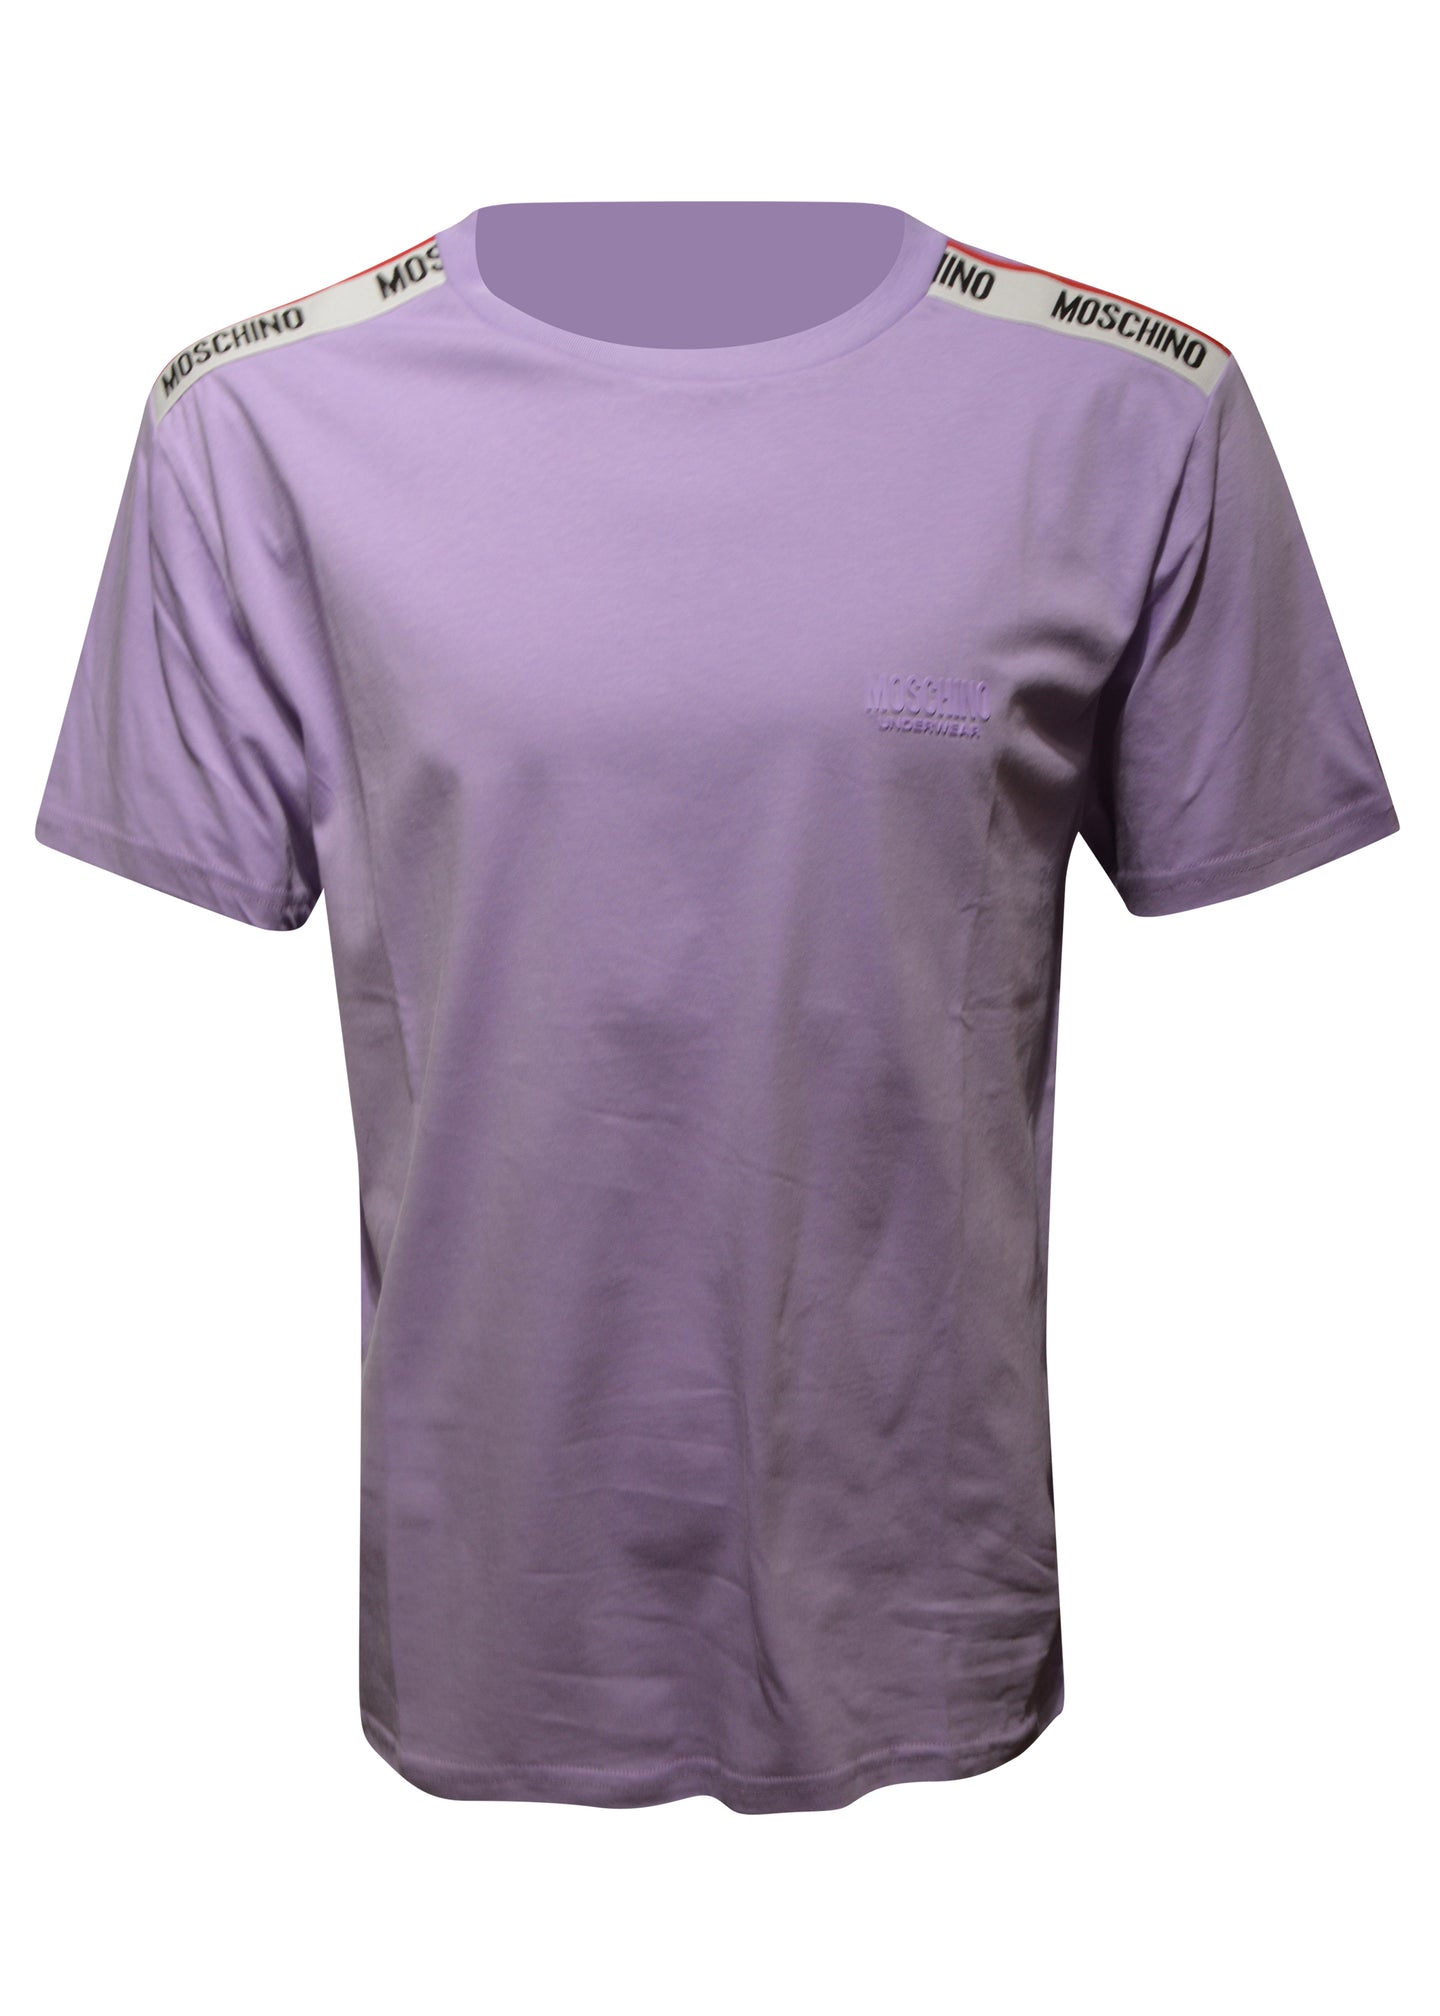 Moschino - Short Sleeve Crew T-Shirt Multi Colour Tape Shoulder - 400177 - Lilac